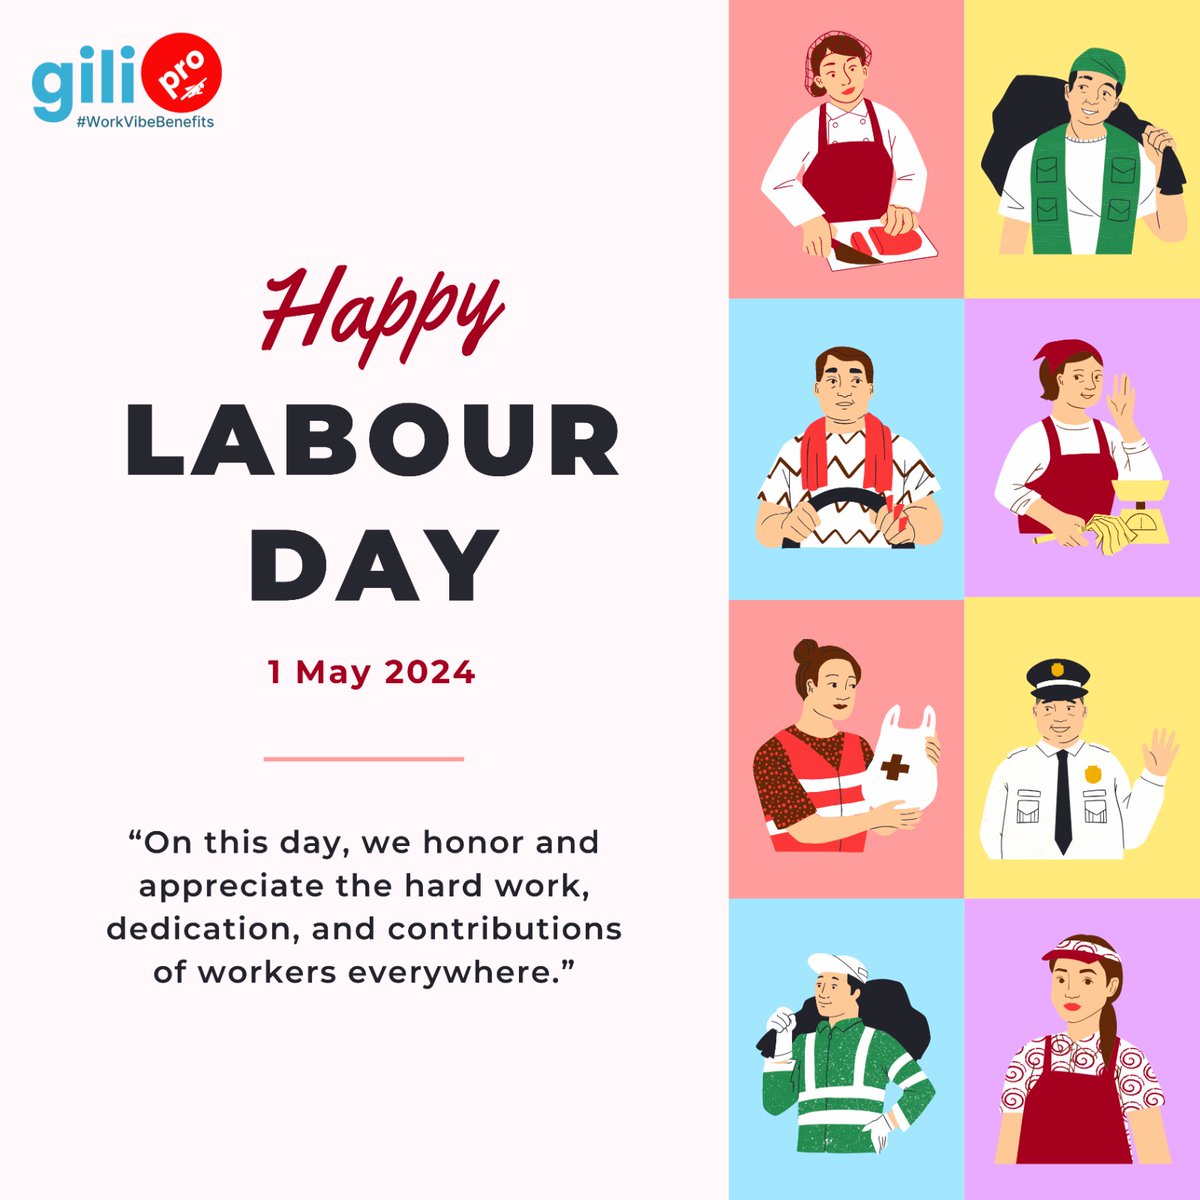 Today, we honor the hard work and dedication of every individual who contributes to building our society. Happy Labour Day!

#gilipro #labourday #labour #labourday2024 #happylabourday #happylabour #1stmay #workersday #workers #workvibebenefits #employeewellness #healthcare